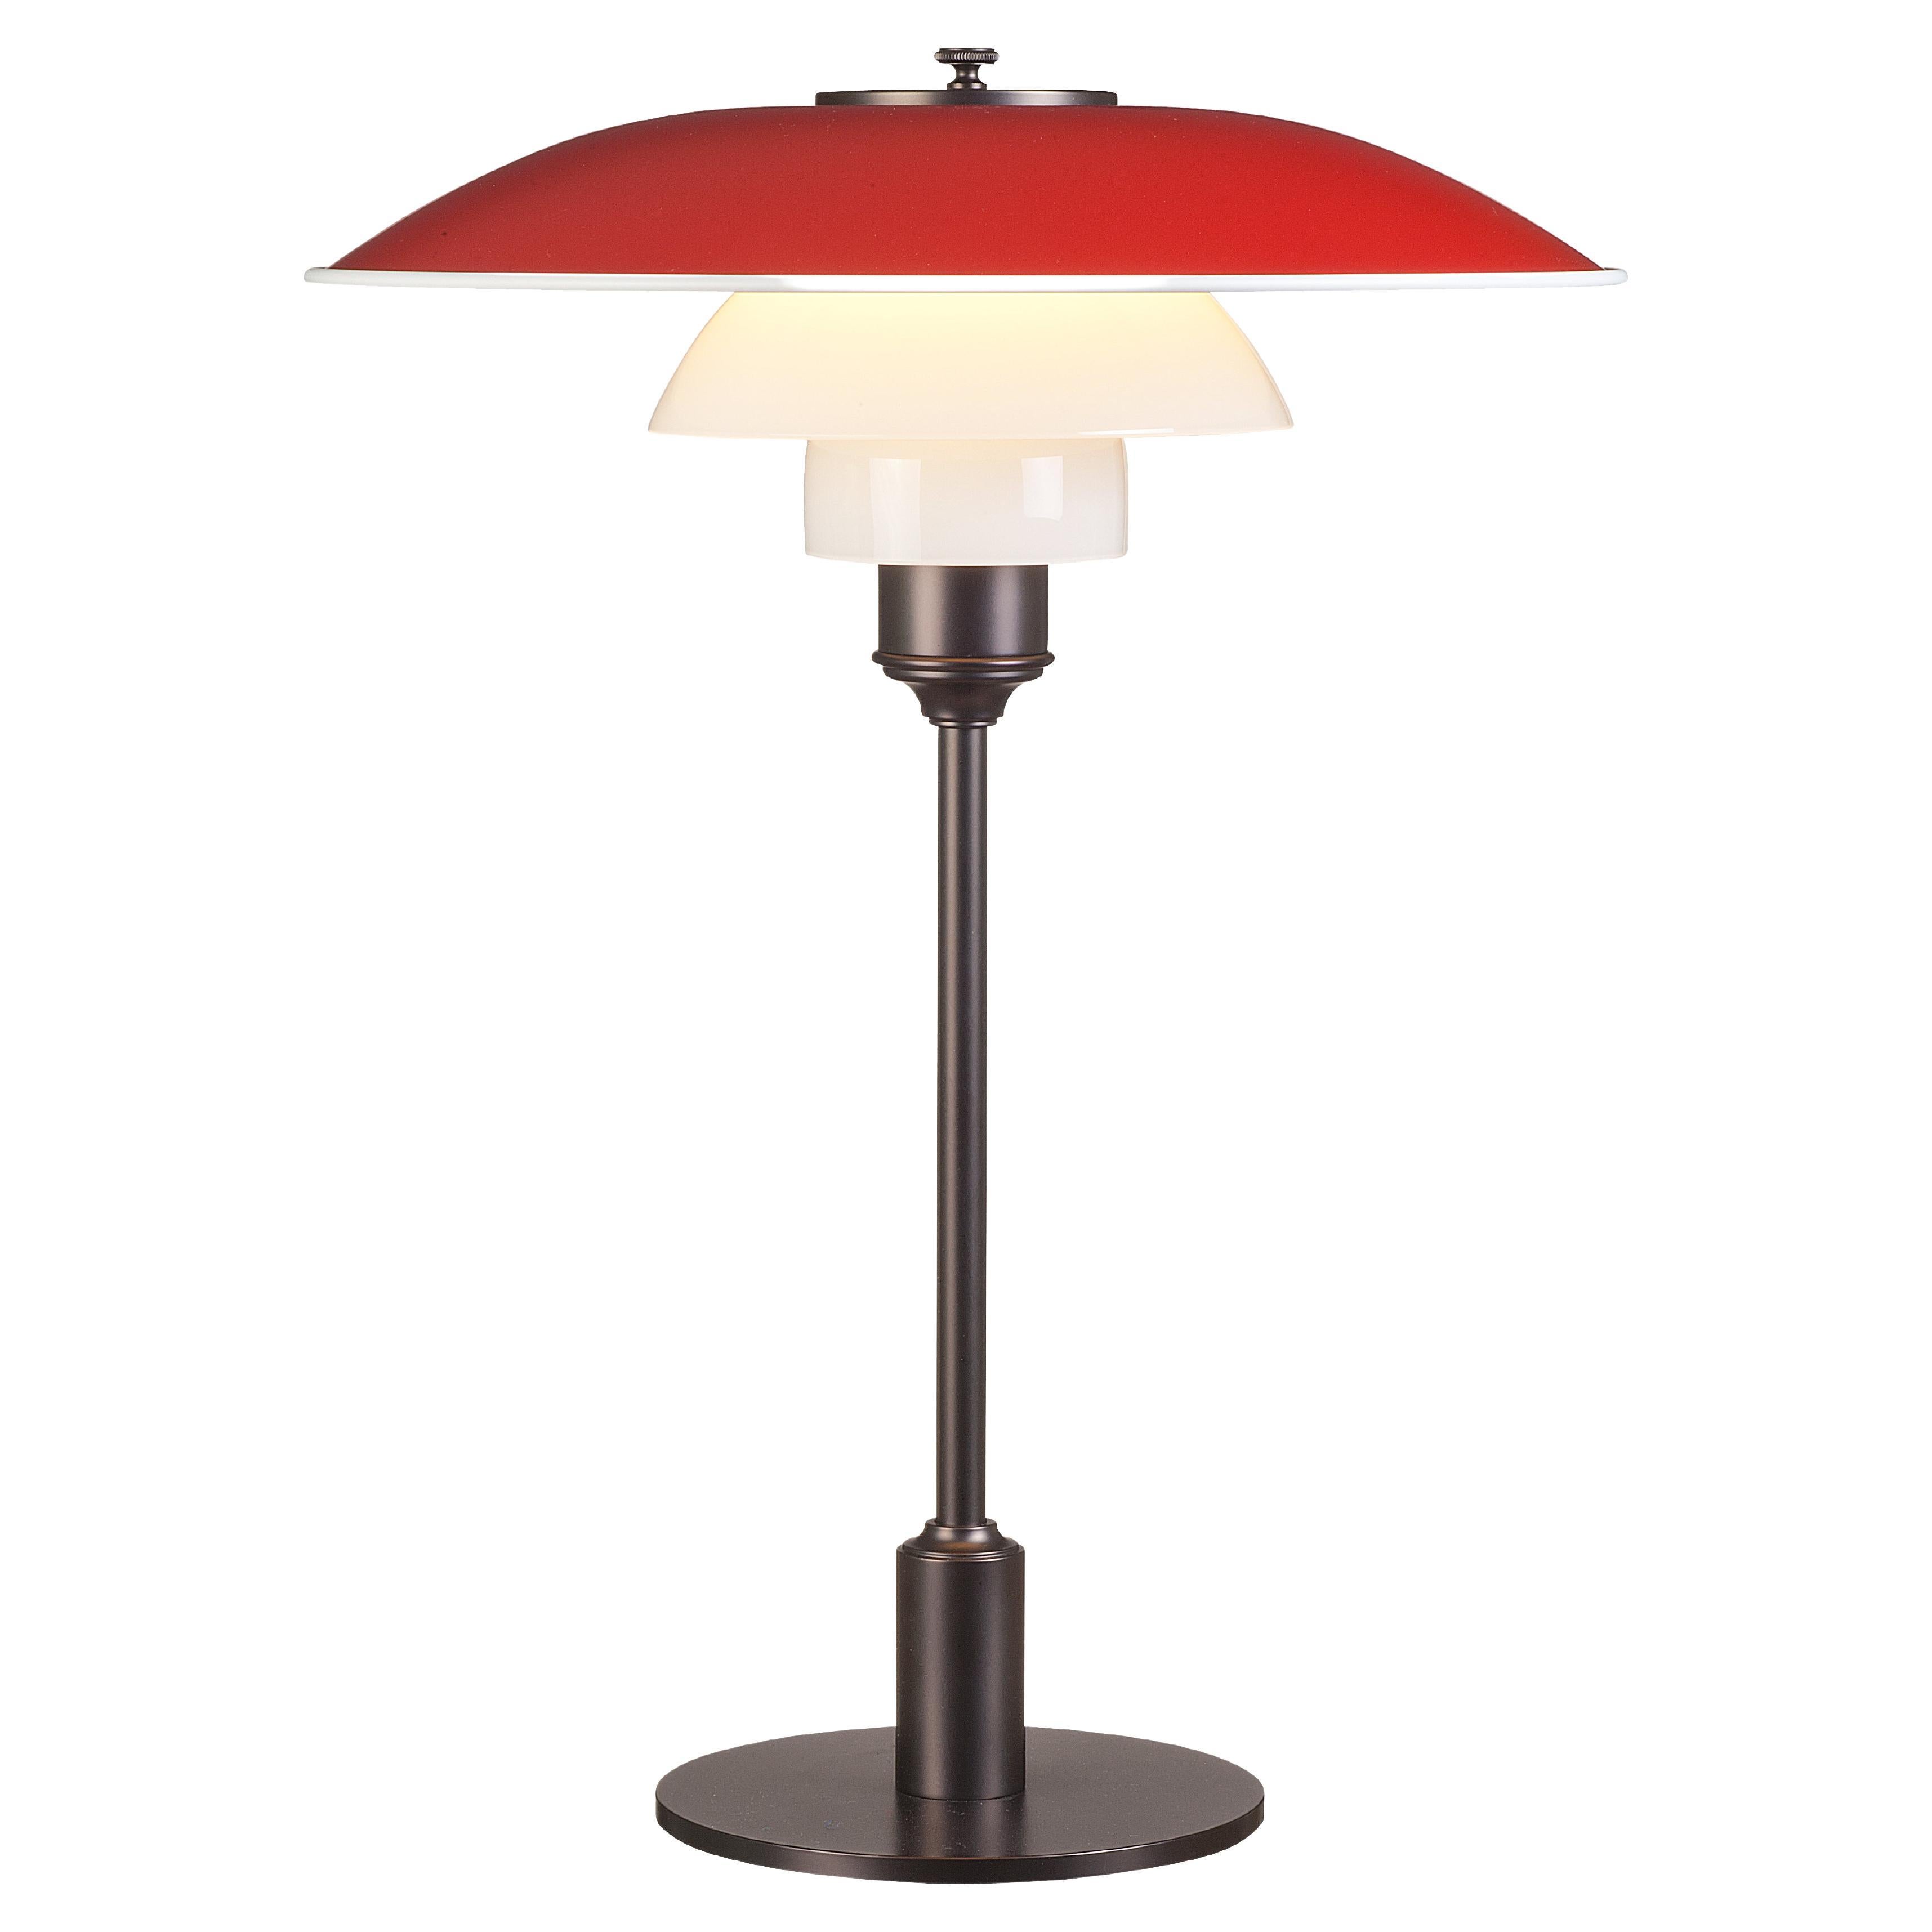 Poul Henningsen PH 3½-2½ table lamp for Louis Poulsen, Denmark.

Poul Henning Sen’s legendary design stems from his own, brilliant three-shade system from late 1920s. Poul Henningsen original design from this period was highly functional, some